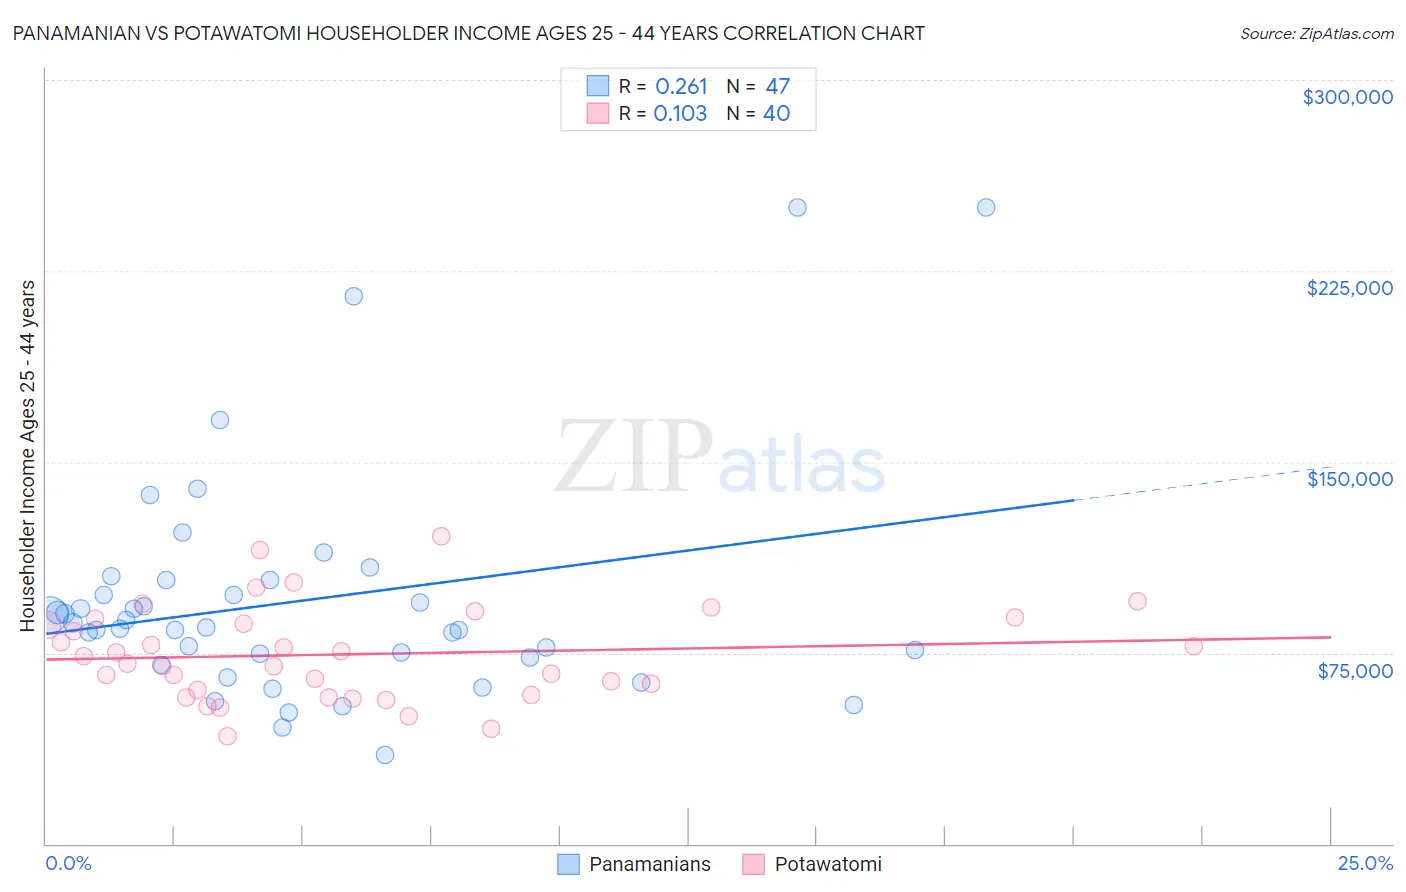 Panamanian vs Potawatomi Householder Income Ages 25 - 44 years